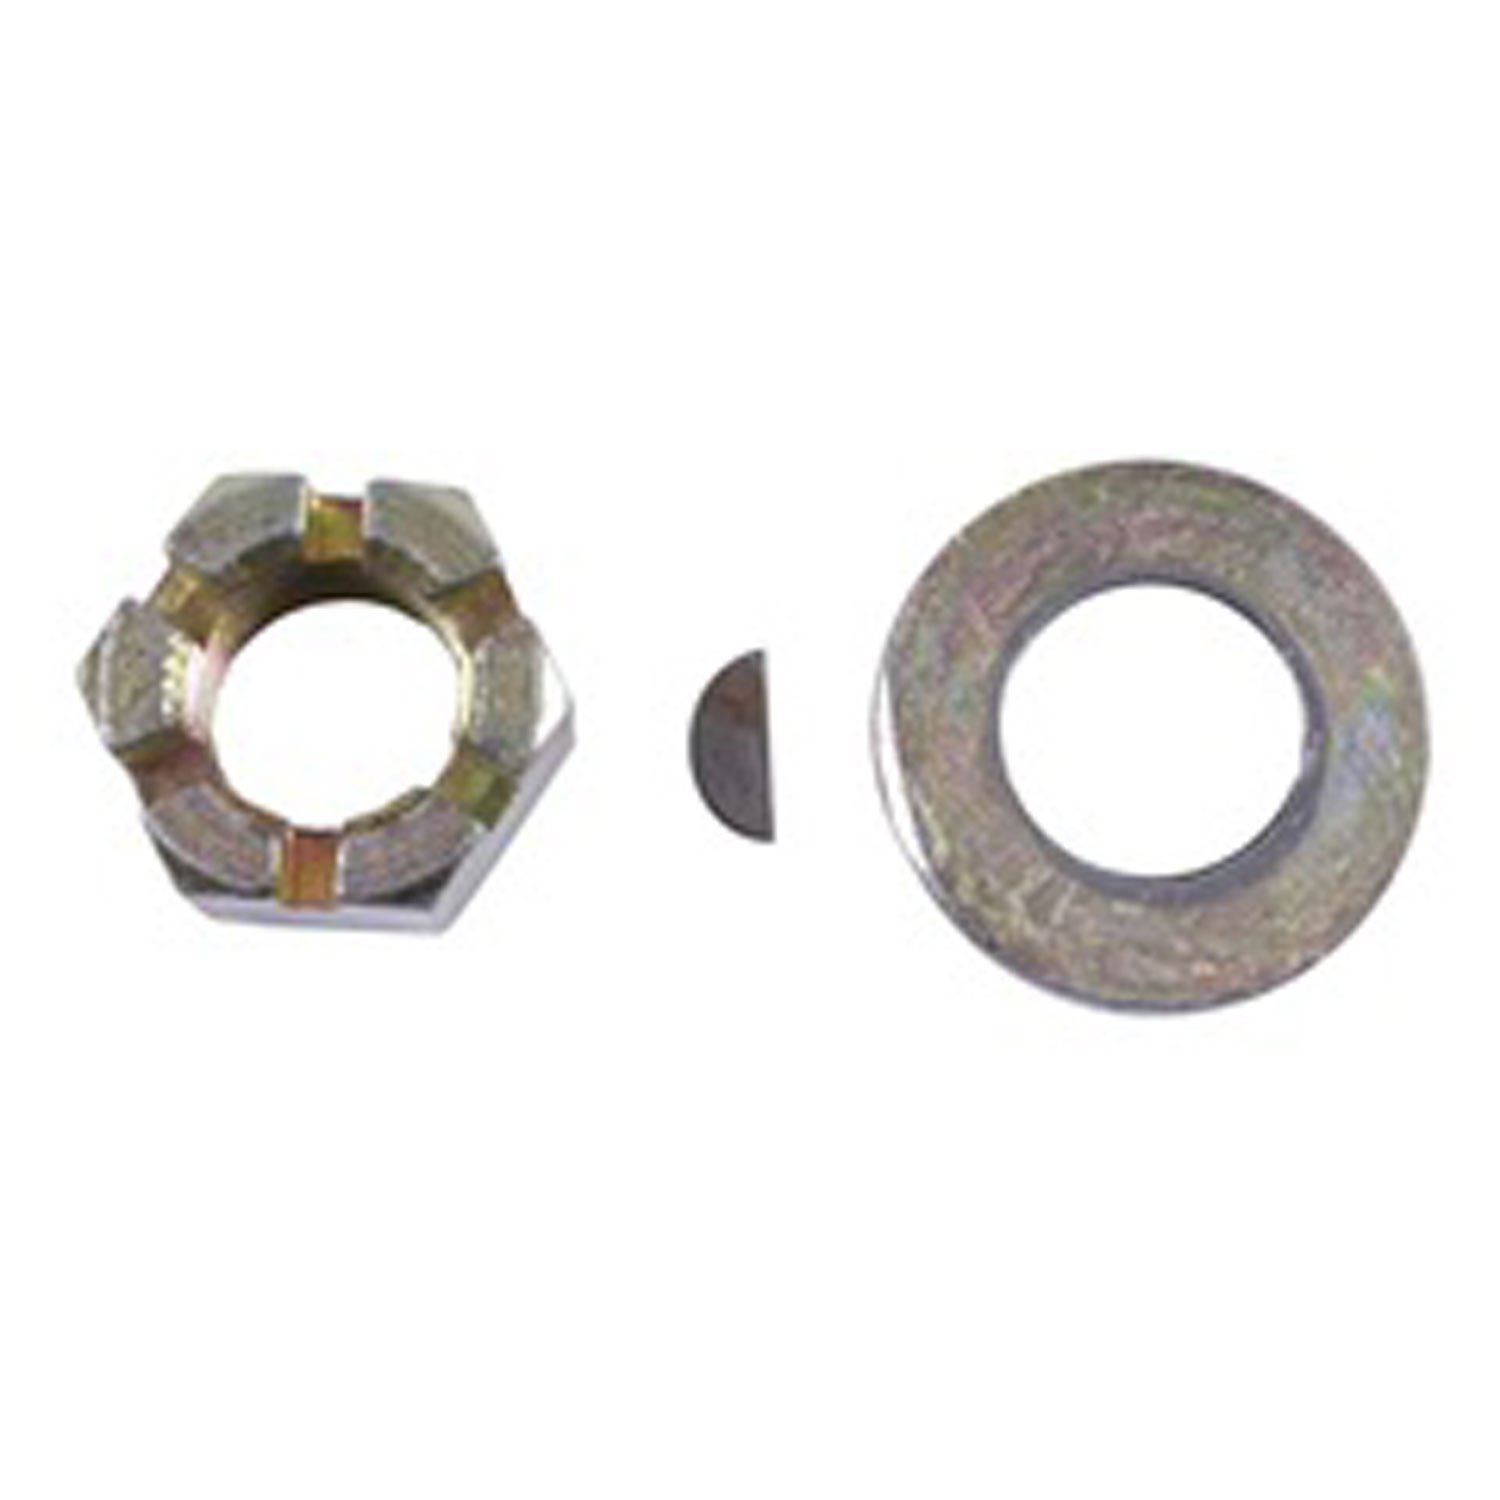 This axle shaft nut washer and key from